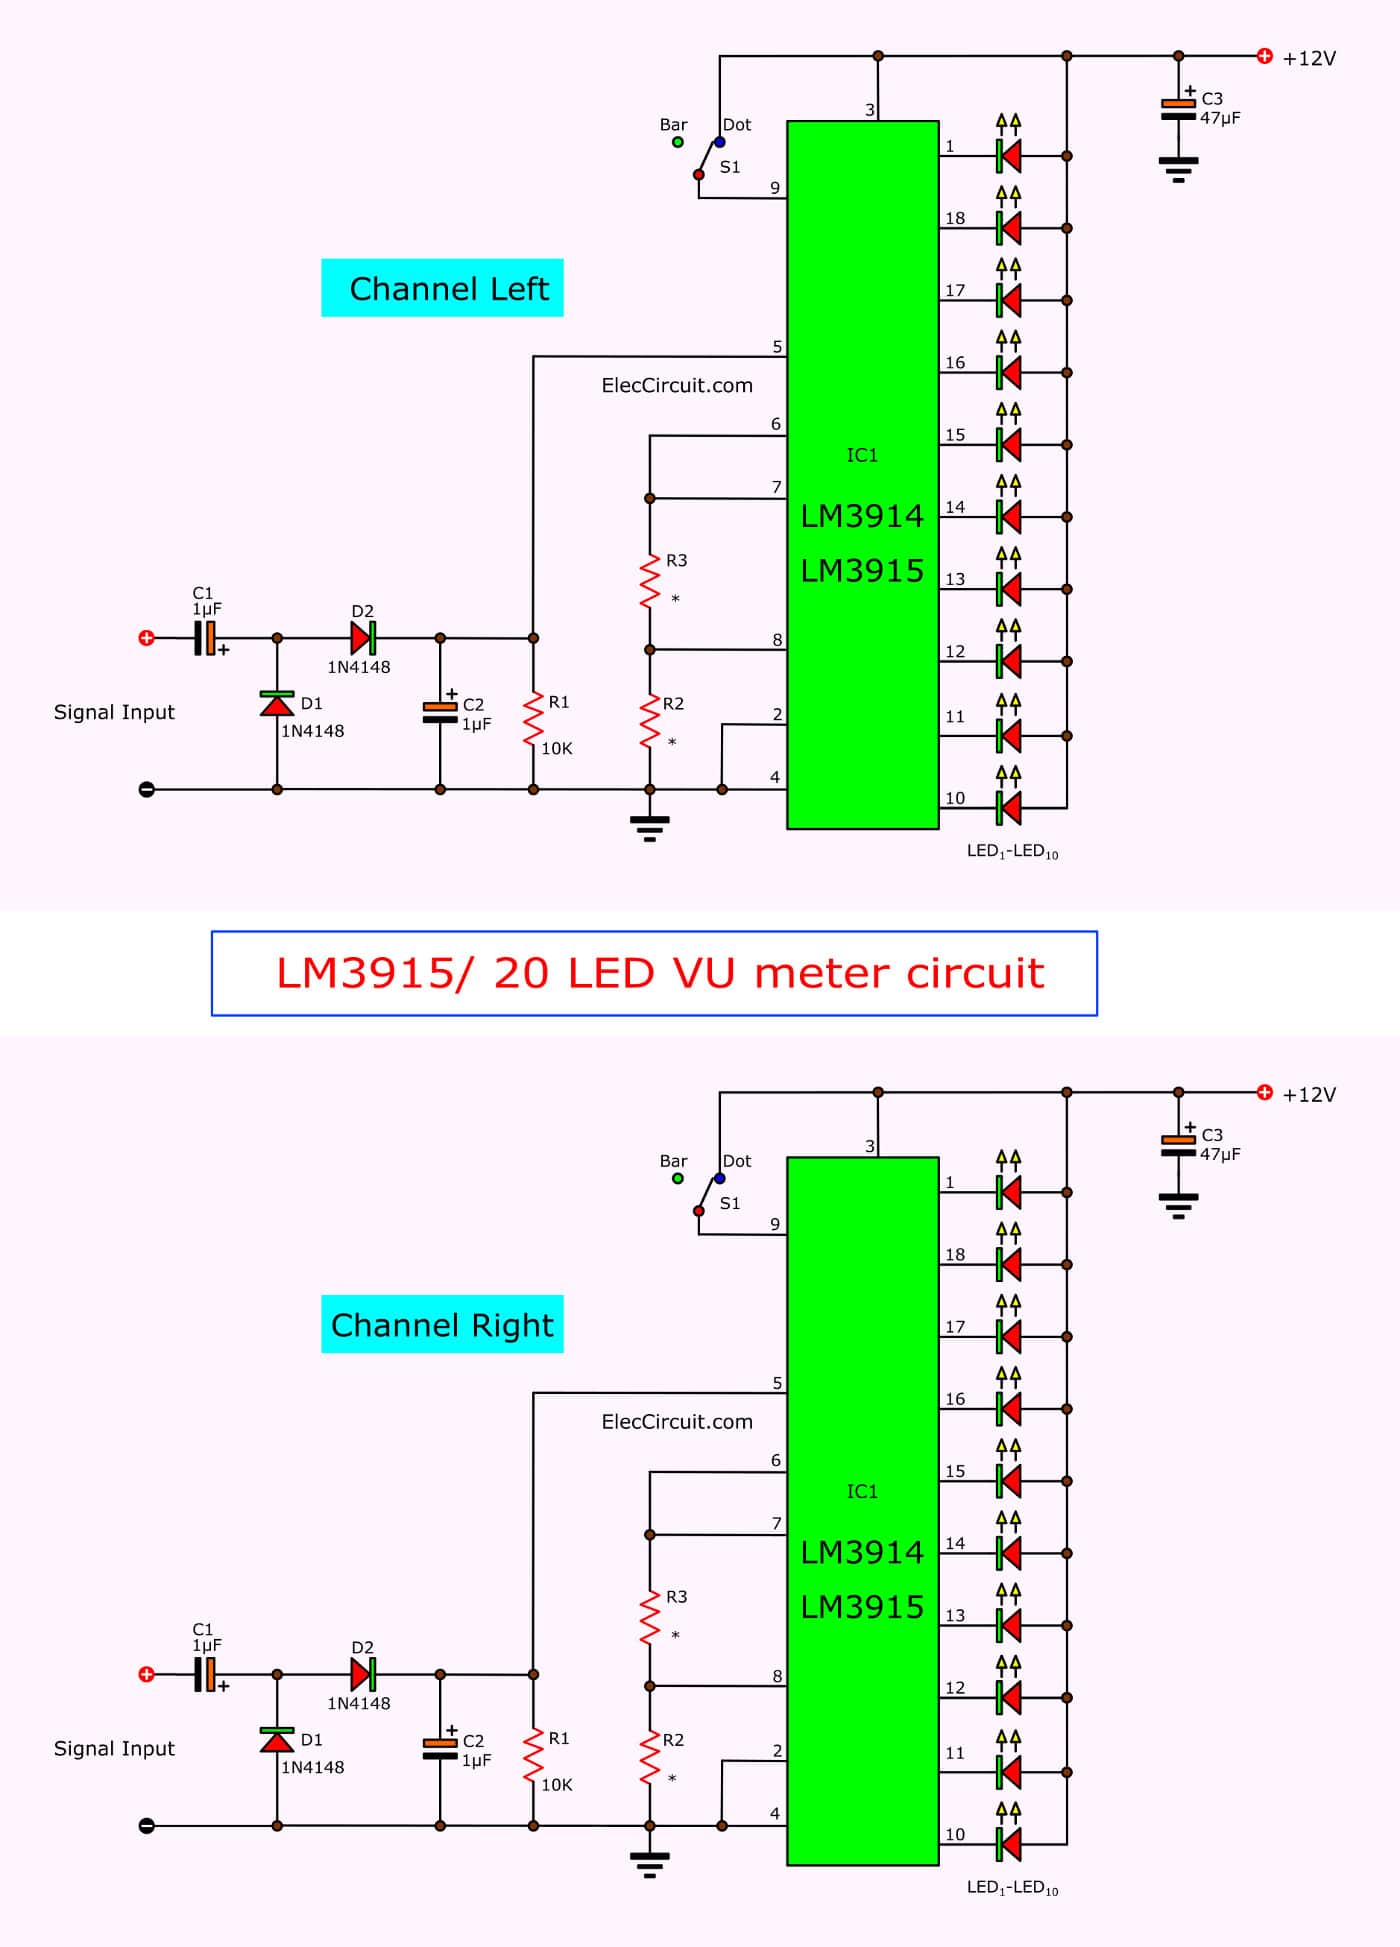  VU meter circuit Stereo 20 LED with PCB ElecCircuit com